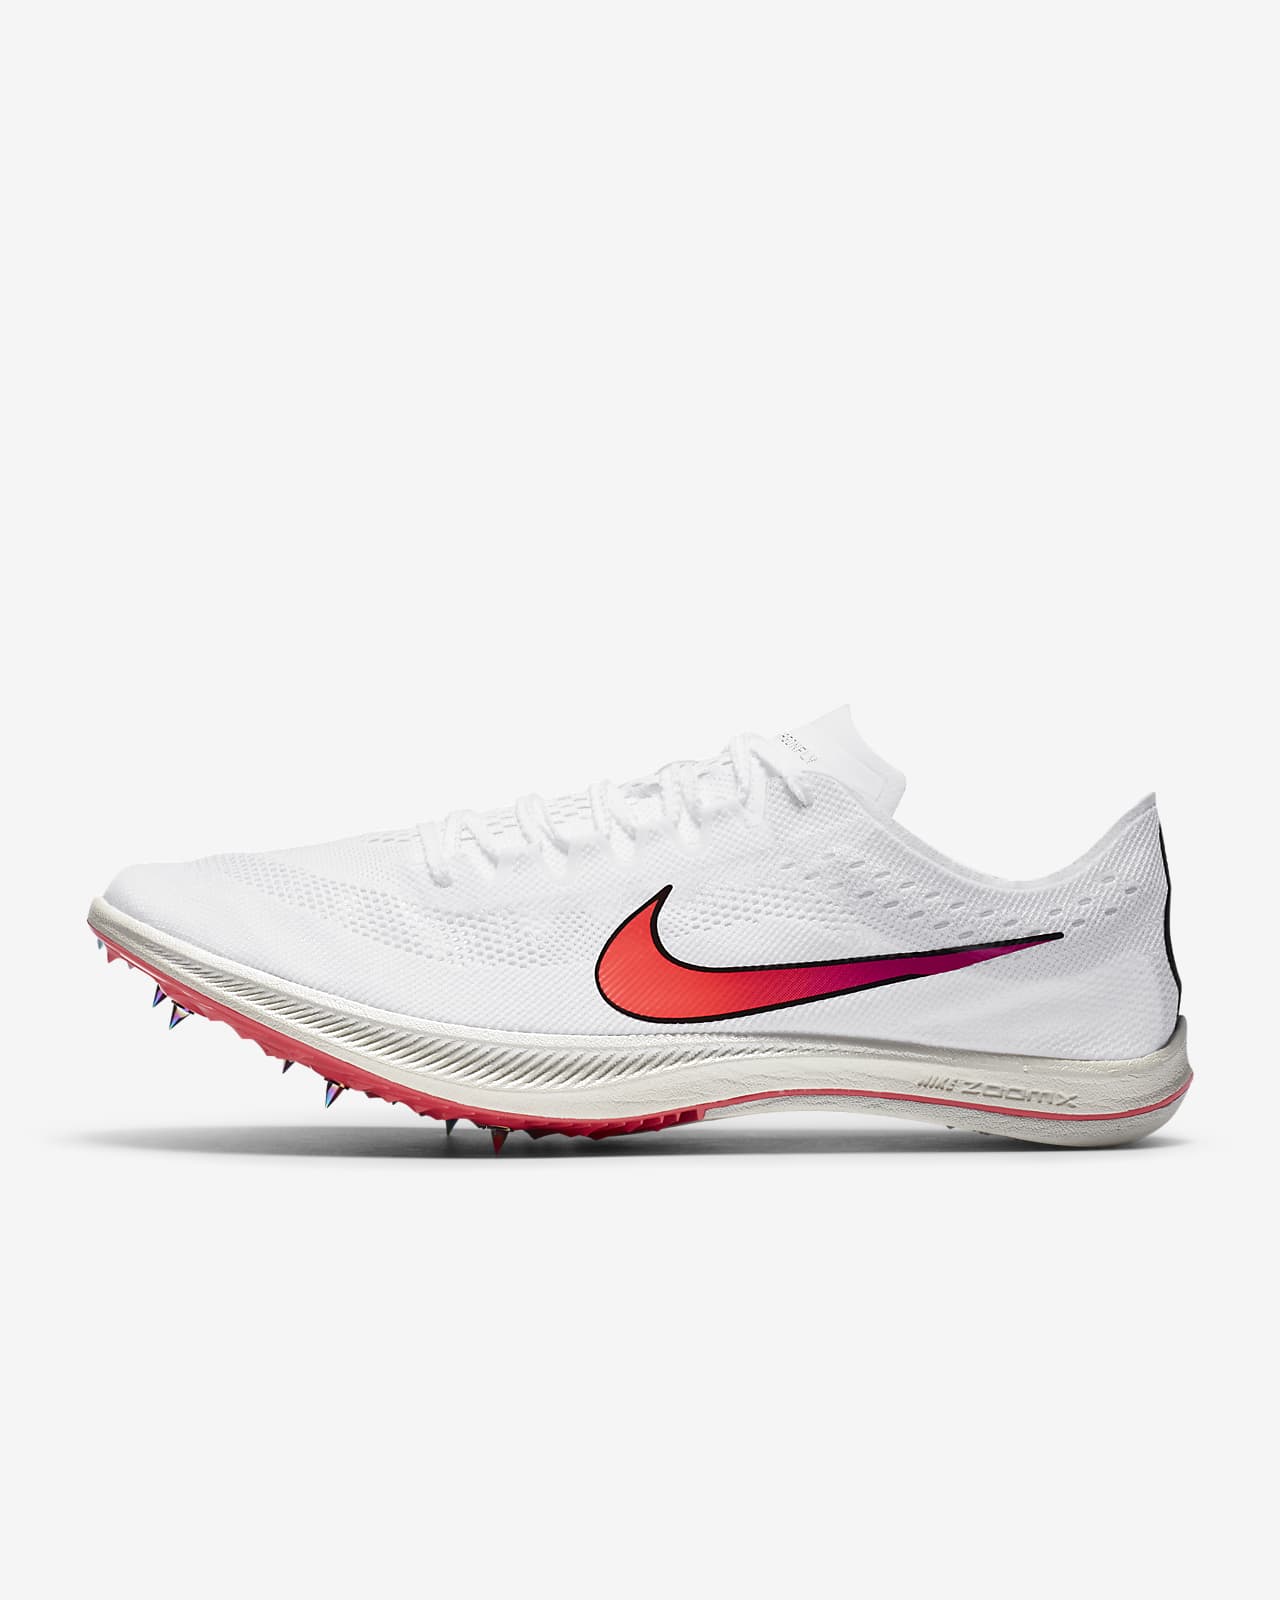 nike spikes running shoes india